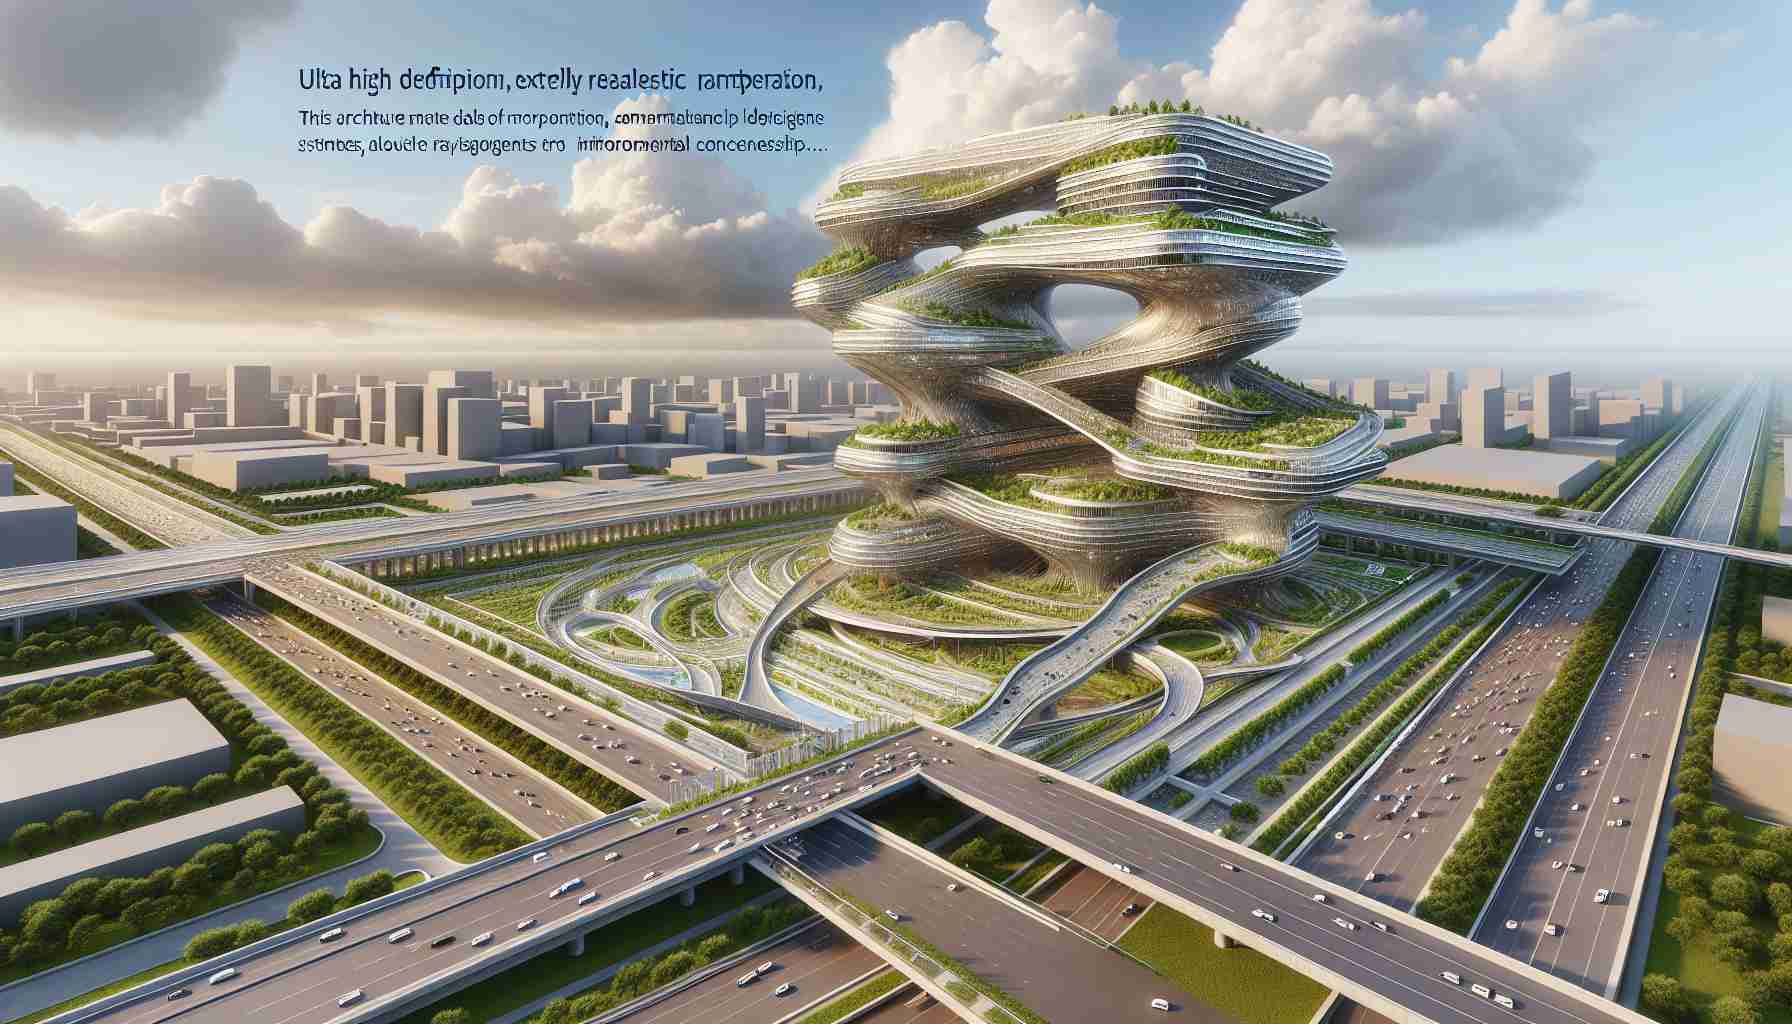 An ultra high definition, extremely realistic rendering of transforming architecture that tells a tale of collaboration and sustainability. The structure may be designed to morph, exuding dynamism and adaptability. Should include elements of sustainable construction such as solar panels, green spaces, and rainwater harvesting systems to demonstrate environmental consciousness. This architectural masterpiece is a result of a commendable partnership, a metaphorical symbol of collaboration- possibly visualized through interconnected designs or bridges linking different parts of the building.